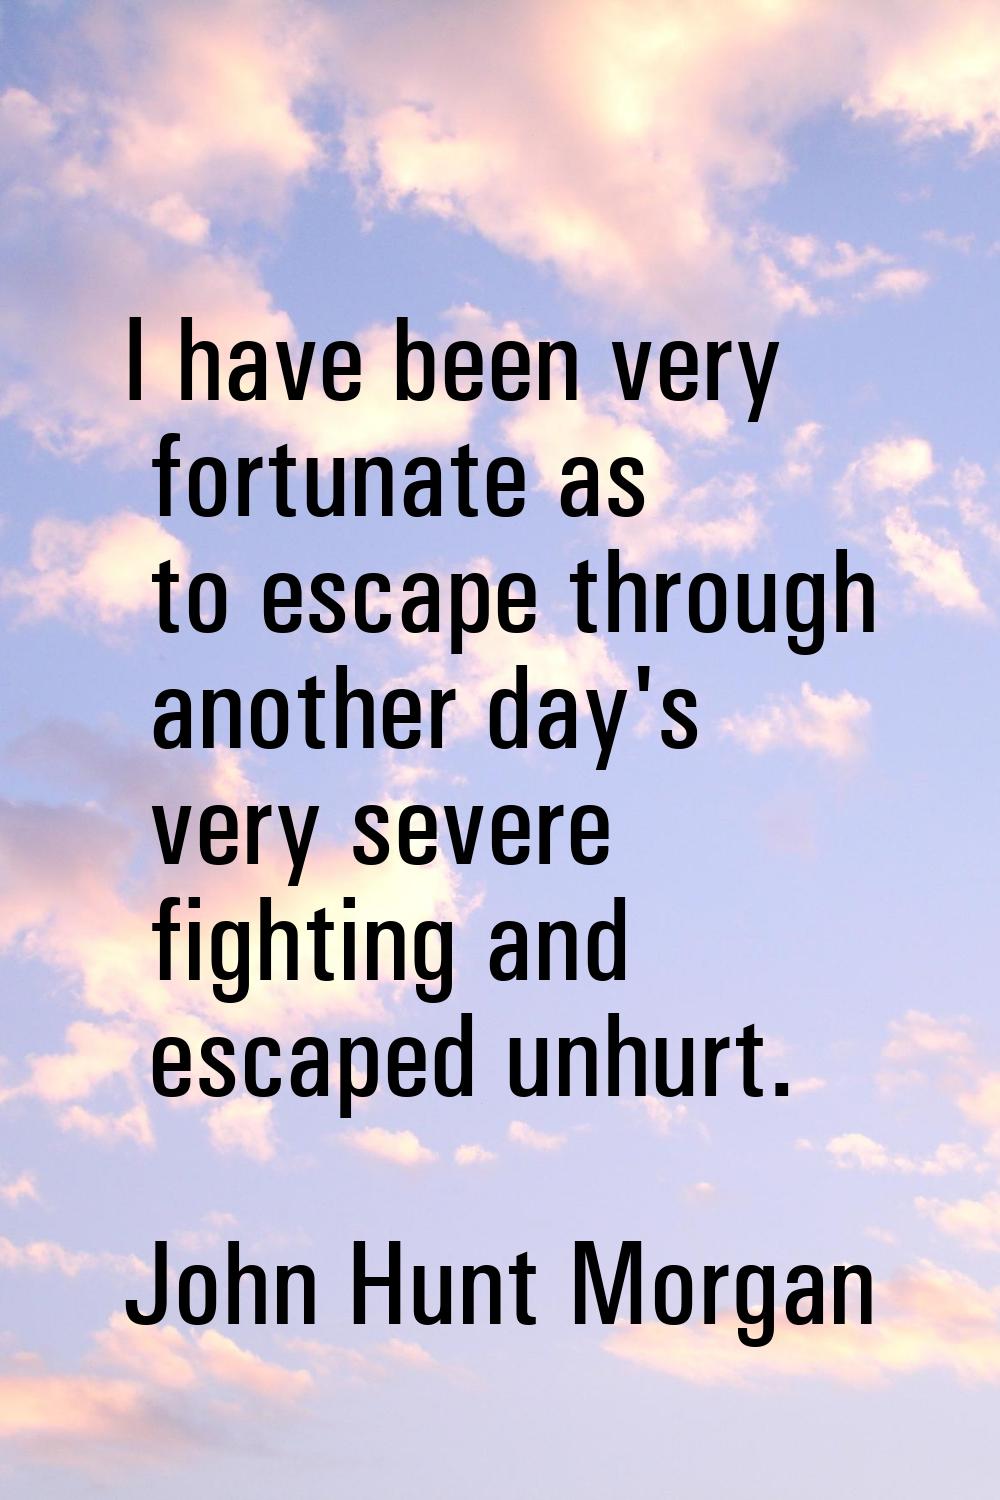 I have been very fortunate as to escape through another day's very severe fighting and escaped unhu